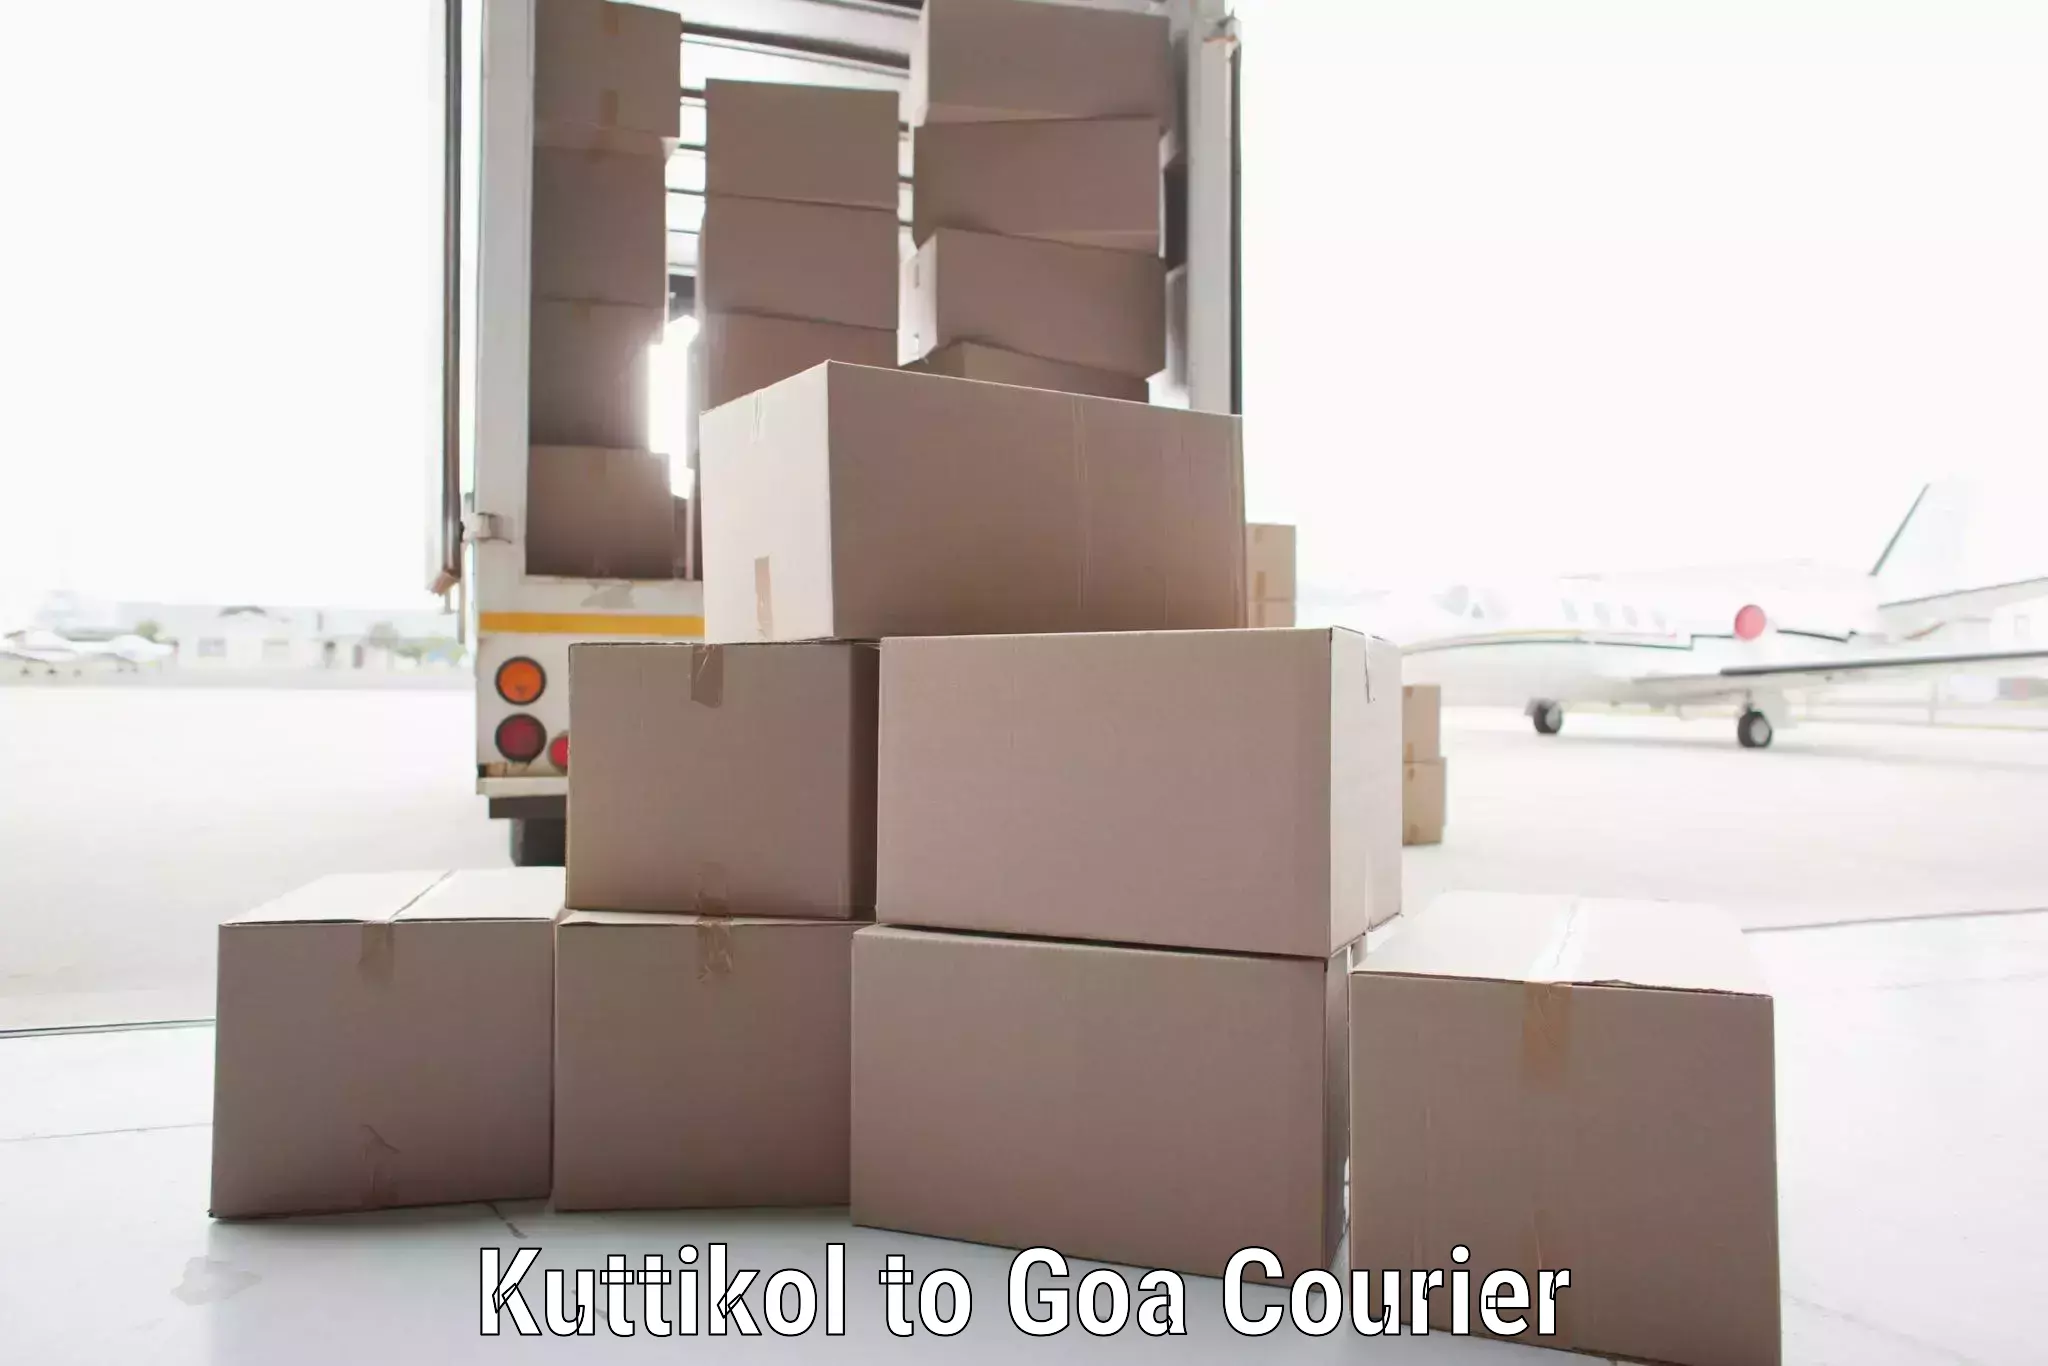 State-of-the-art courier technology in Kuttikol to Goa